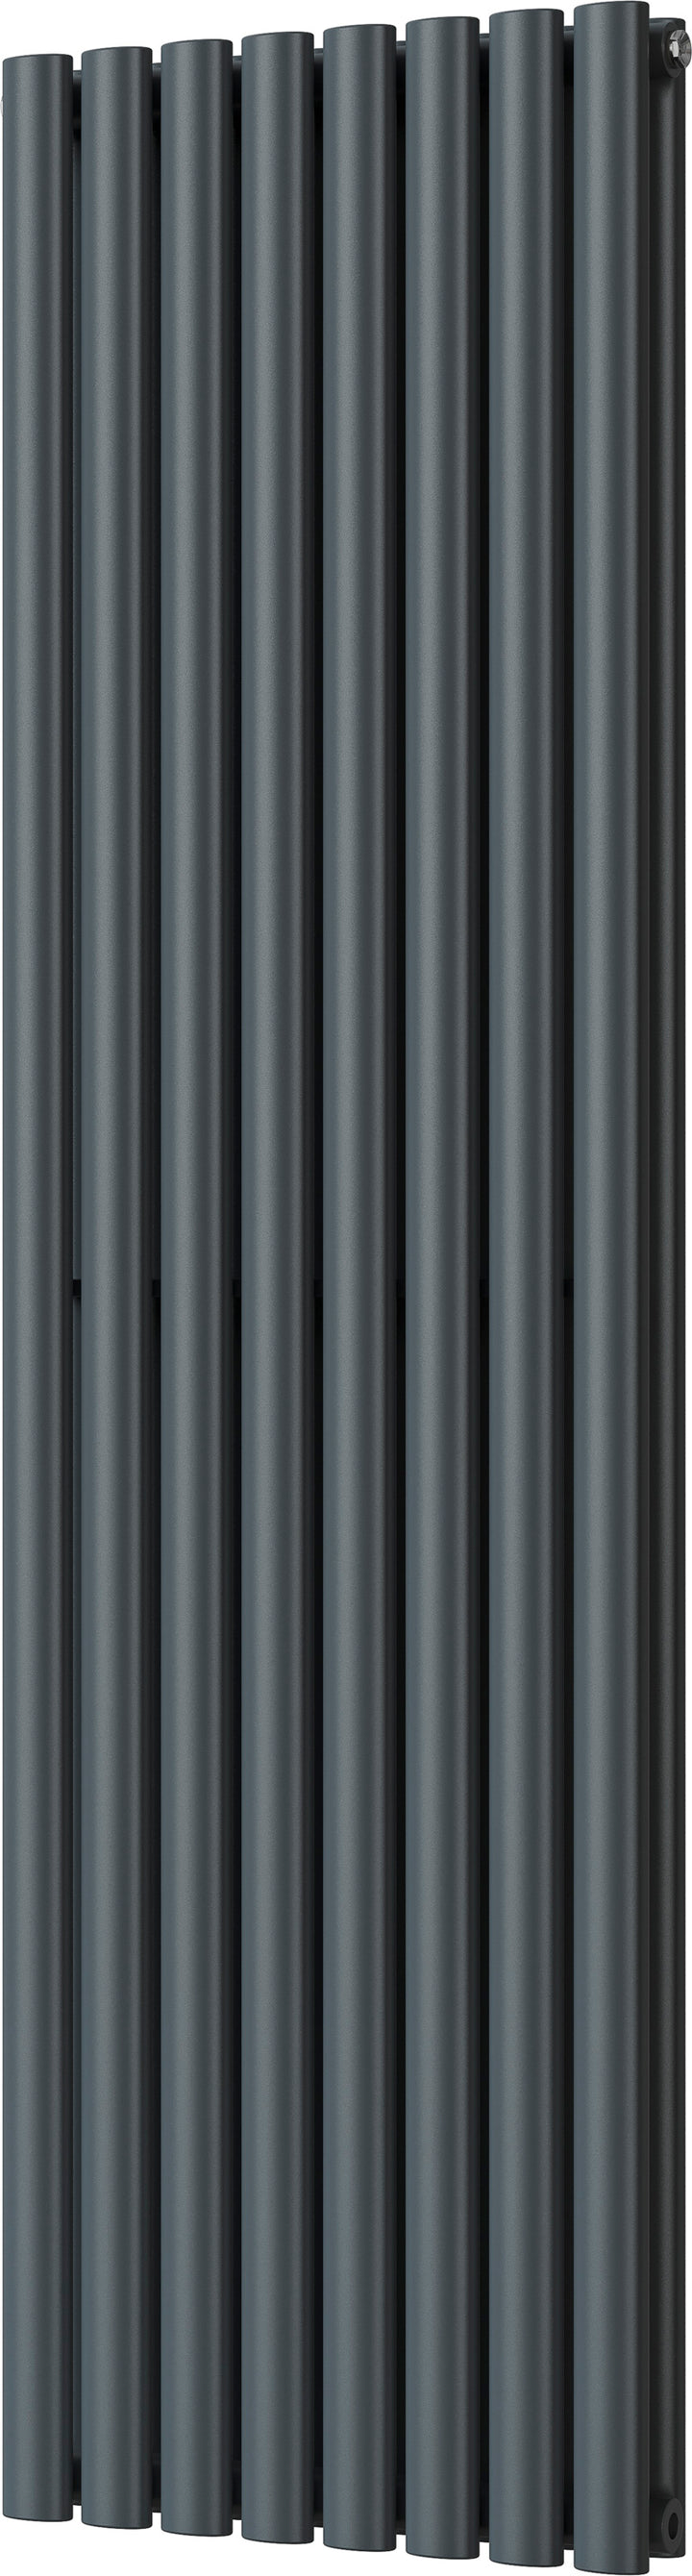 Omeara - Anthracite Vertical Radiator H1600mm x W464mm Double Panel